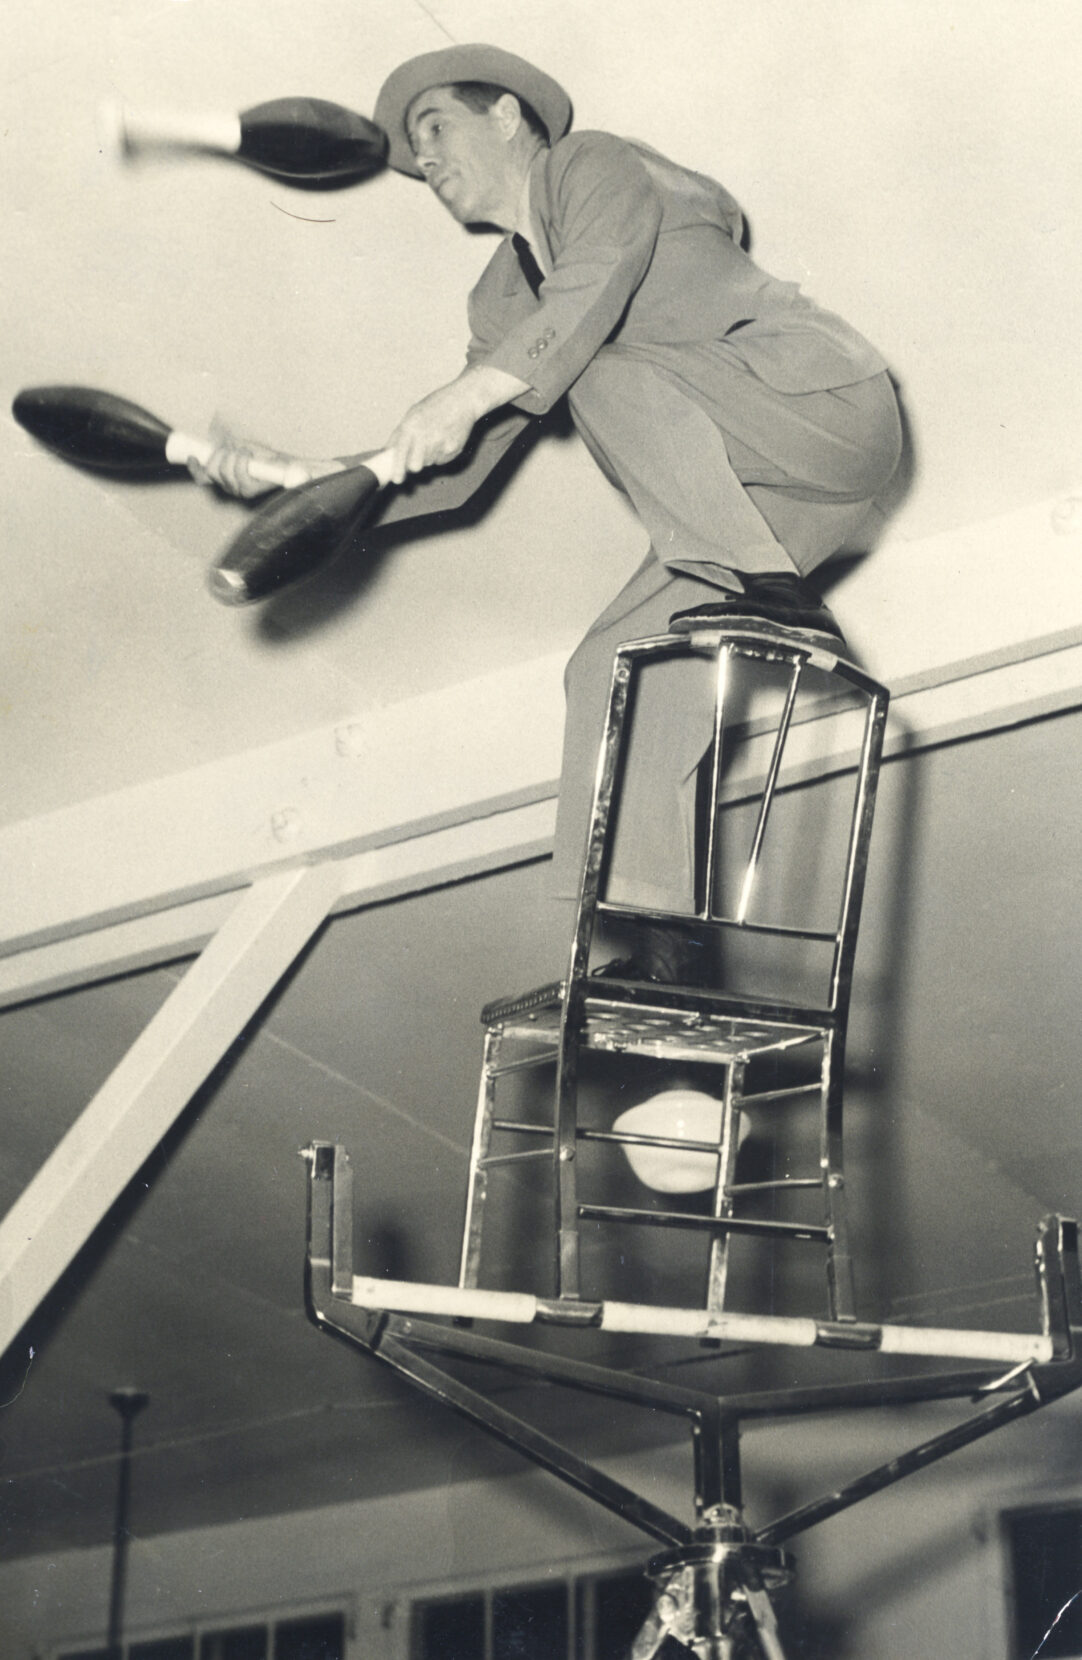 Black and white photo of a man in a suit, balancing on a chair while juggling.